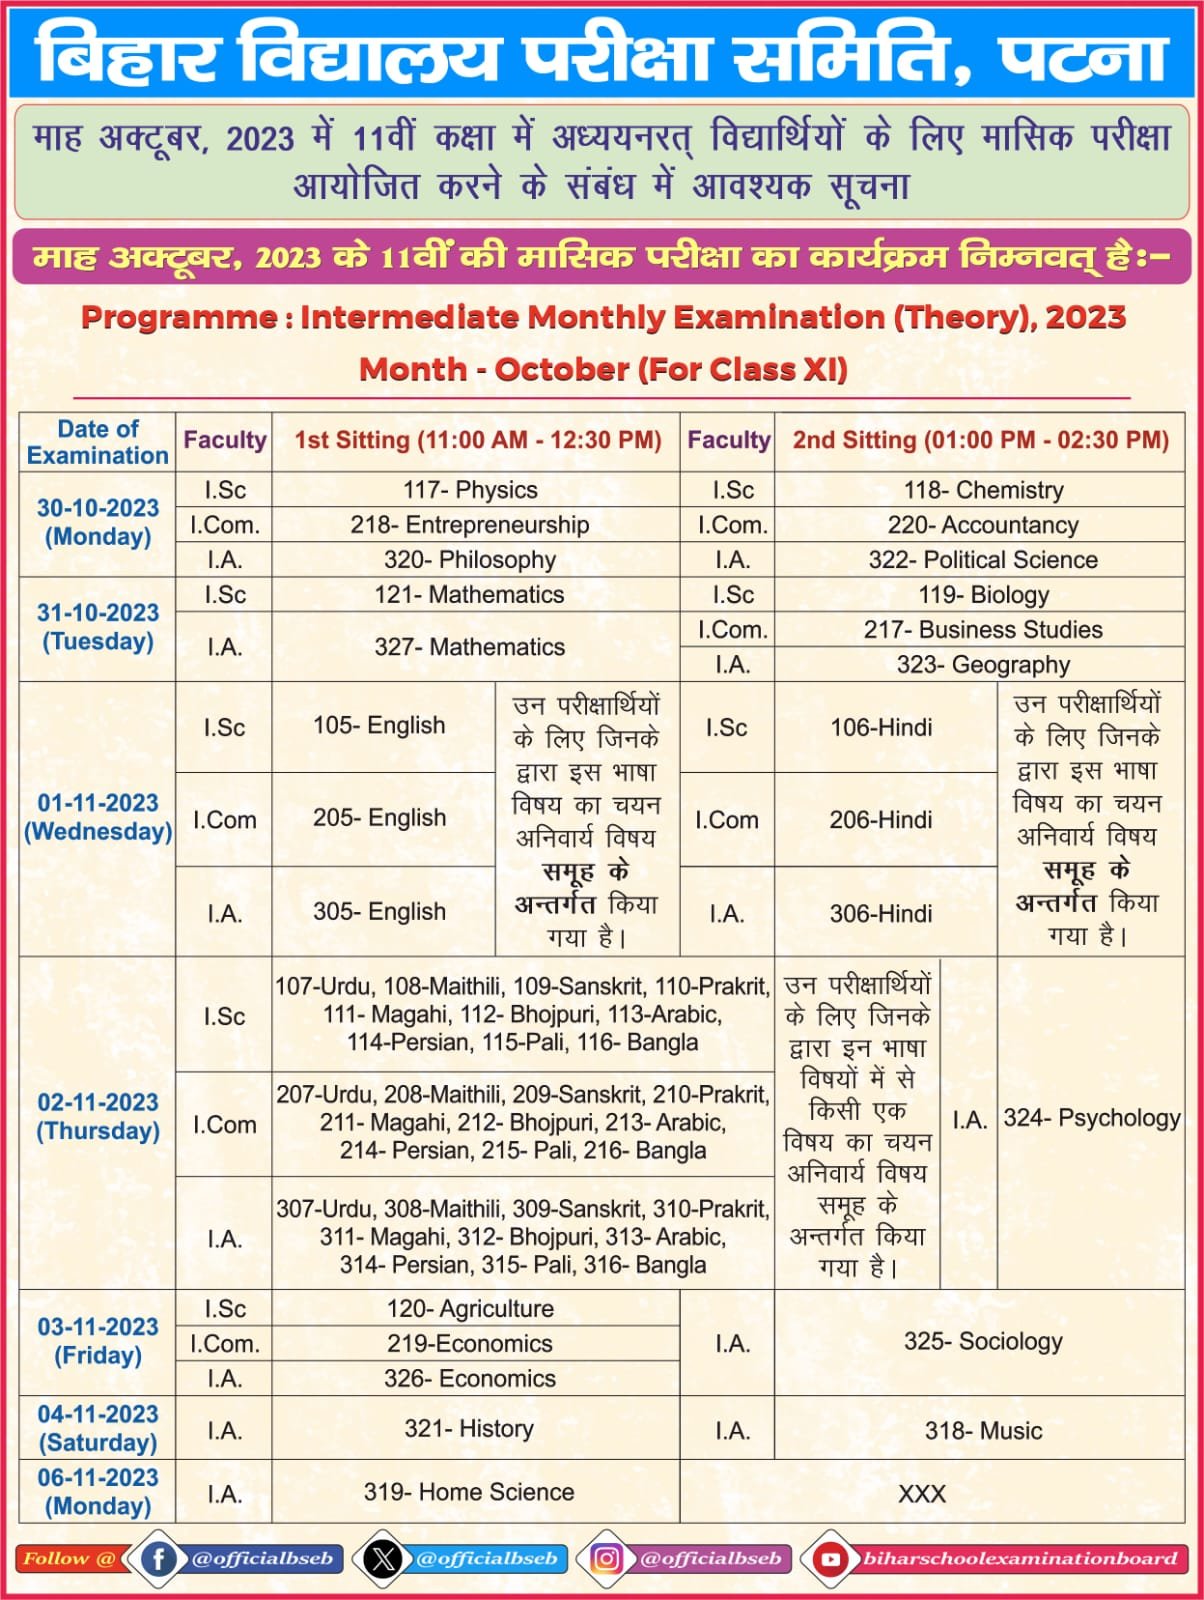 Bihar Board 9th 10th 11th Monthly Exam Schedule And 12th Sent Up Exam Schedule